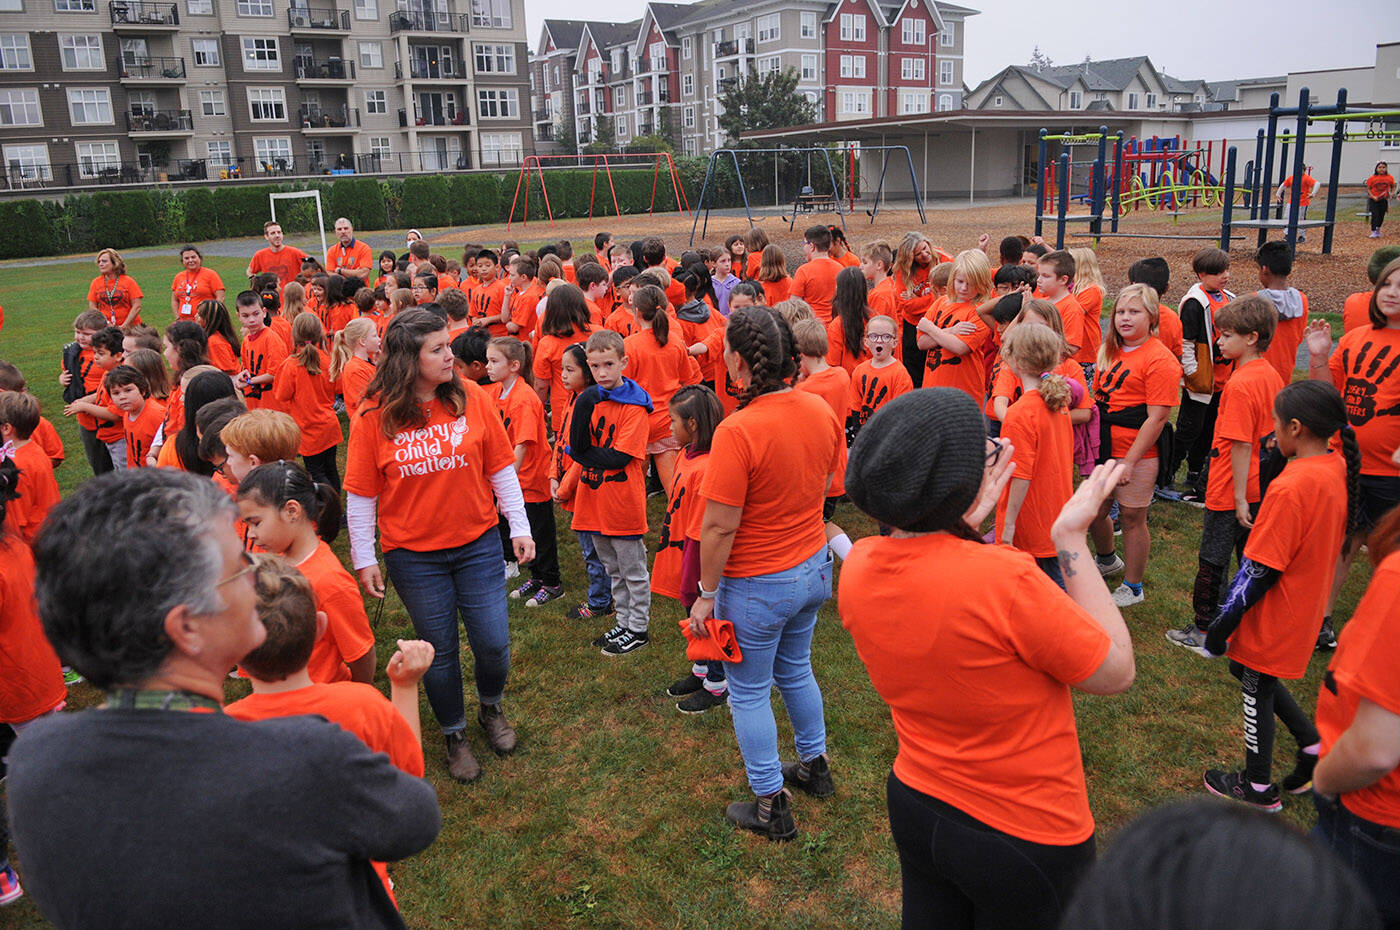 Teachers gather students together for a group photo at Bernard Elementary on Thursday, Sept. 29, 2022. The school’s parent advisory council bought an orange T-shirt for every single student at Bernard. (Jenna Hauck/ Chilliwack Progress)